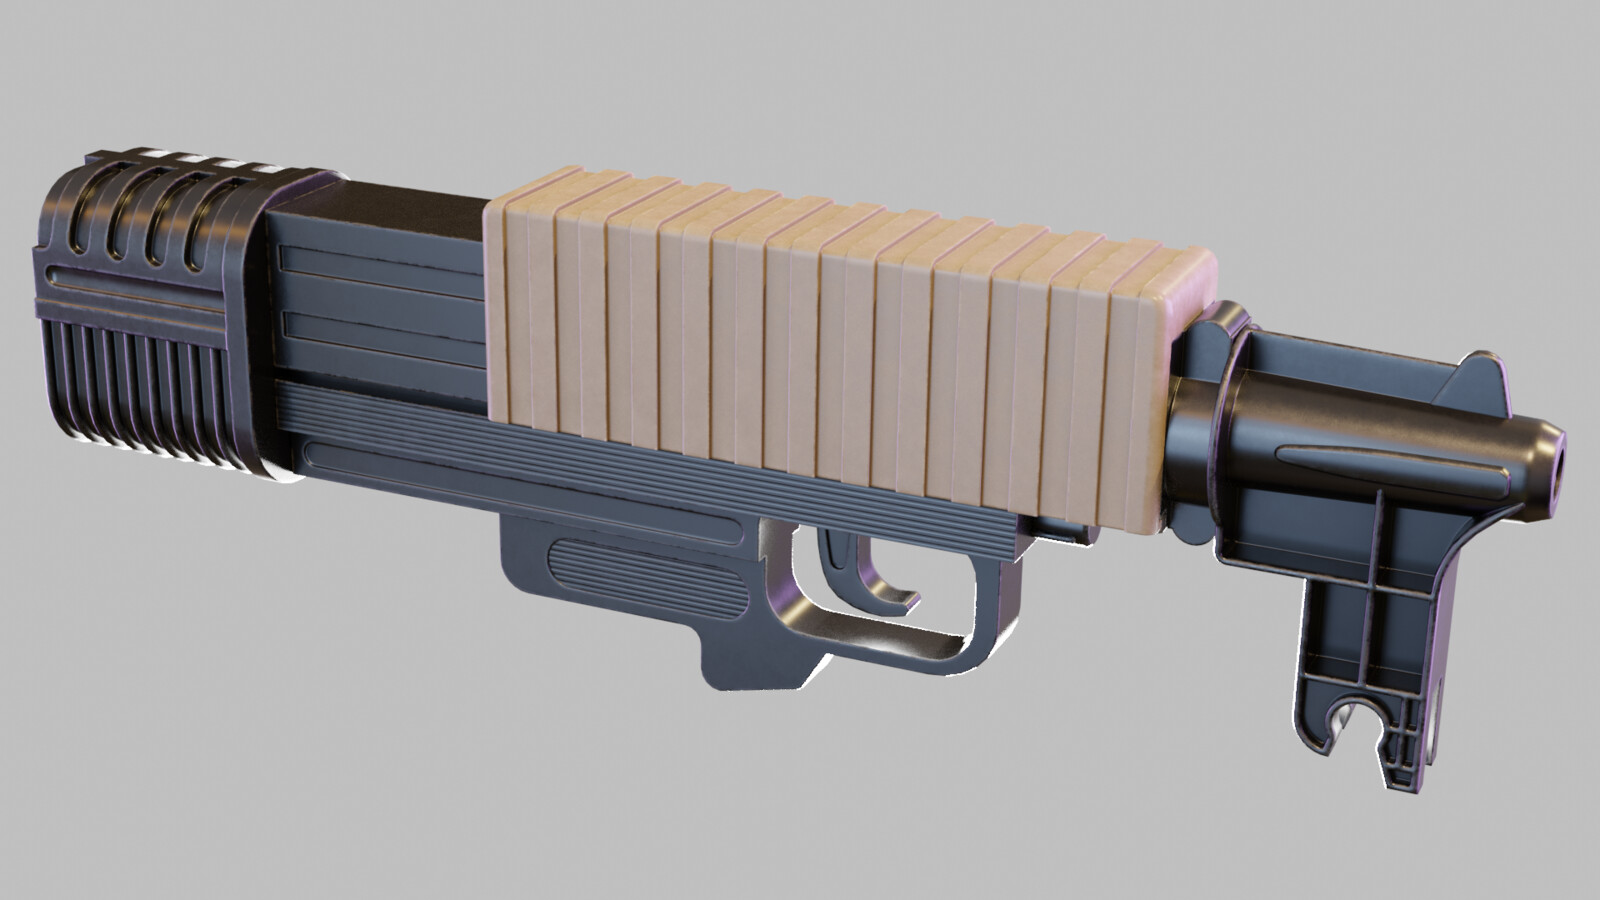 Side view of the Plasma Gun showing most of the familiar details from the sprite.